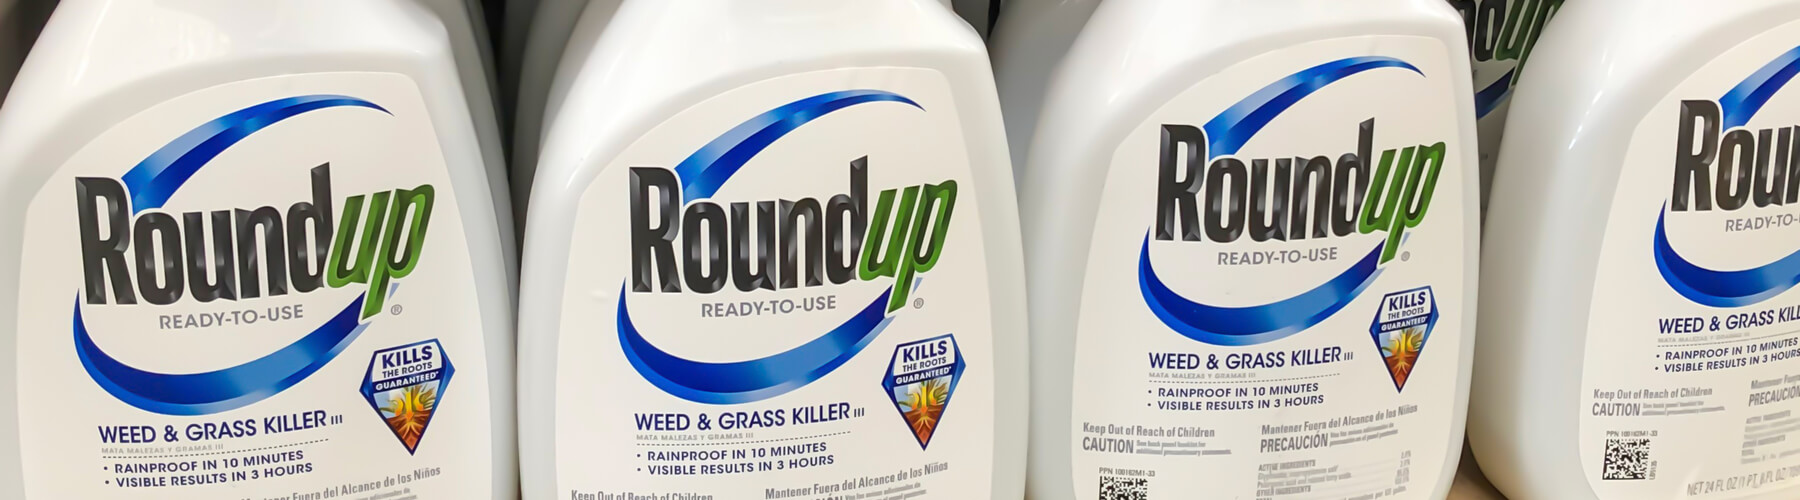 Bottles of Roundup at the store